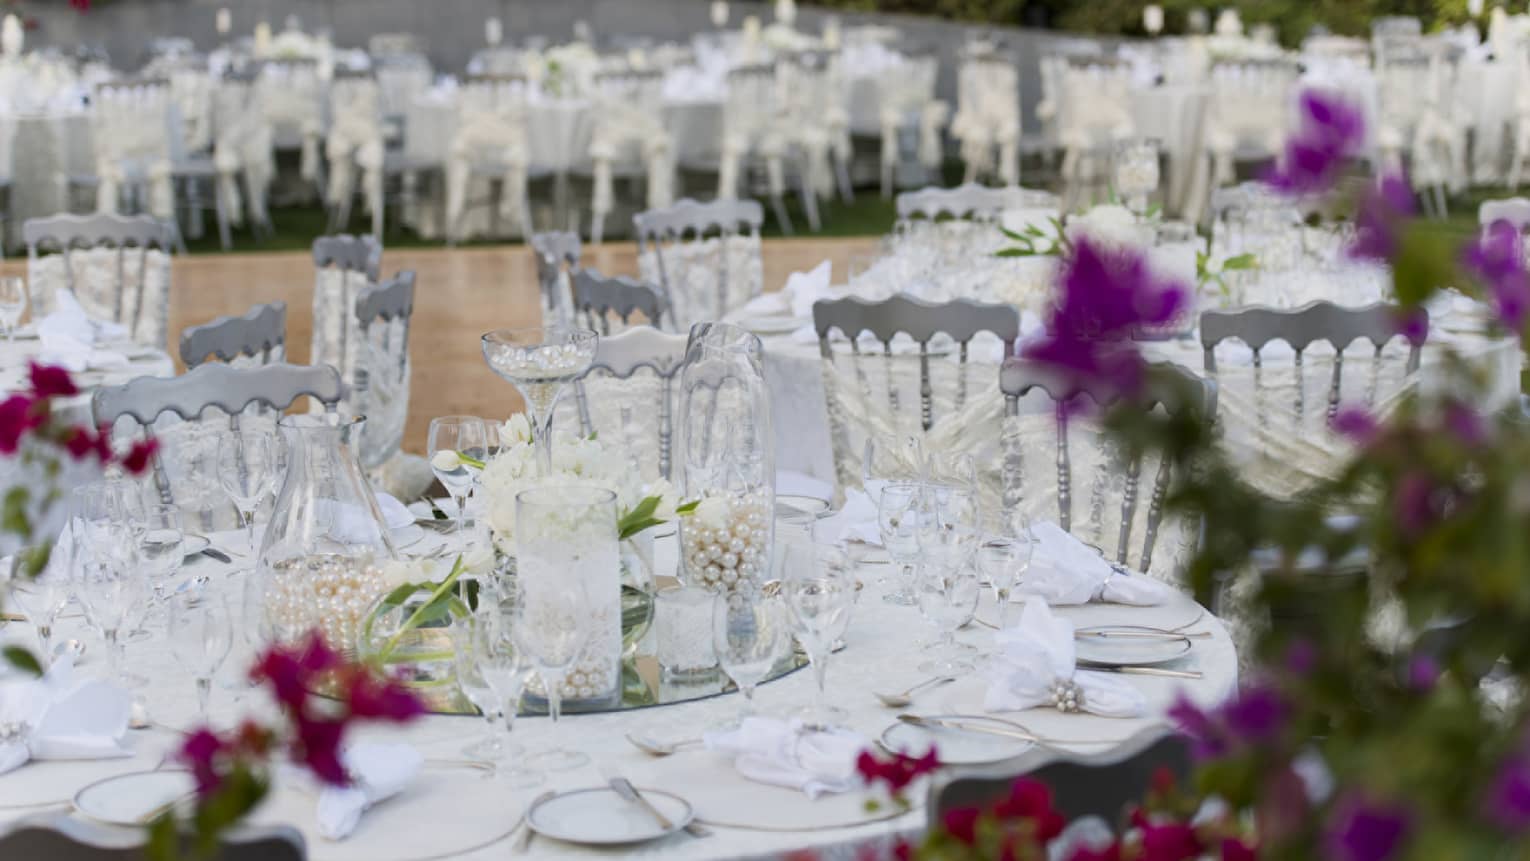 Outdoor banquet with round dining tables covered in crystal, pearl, floral decorations